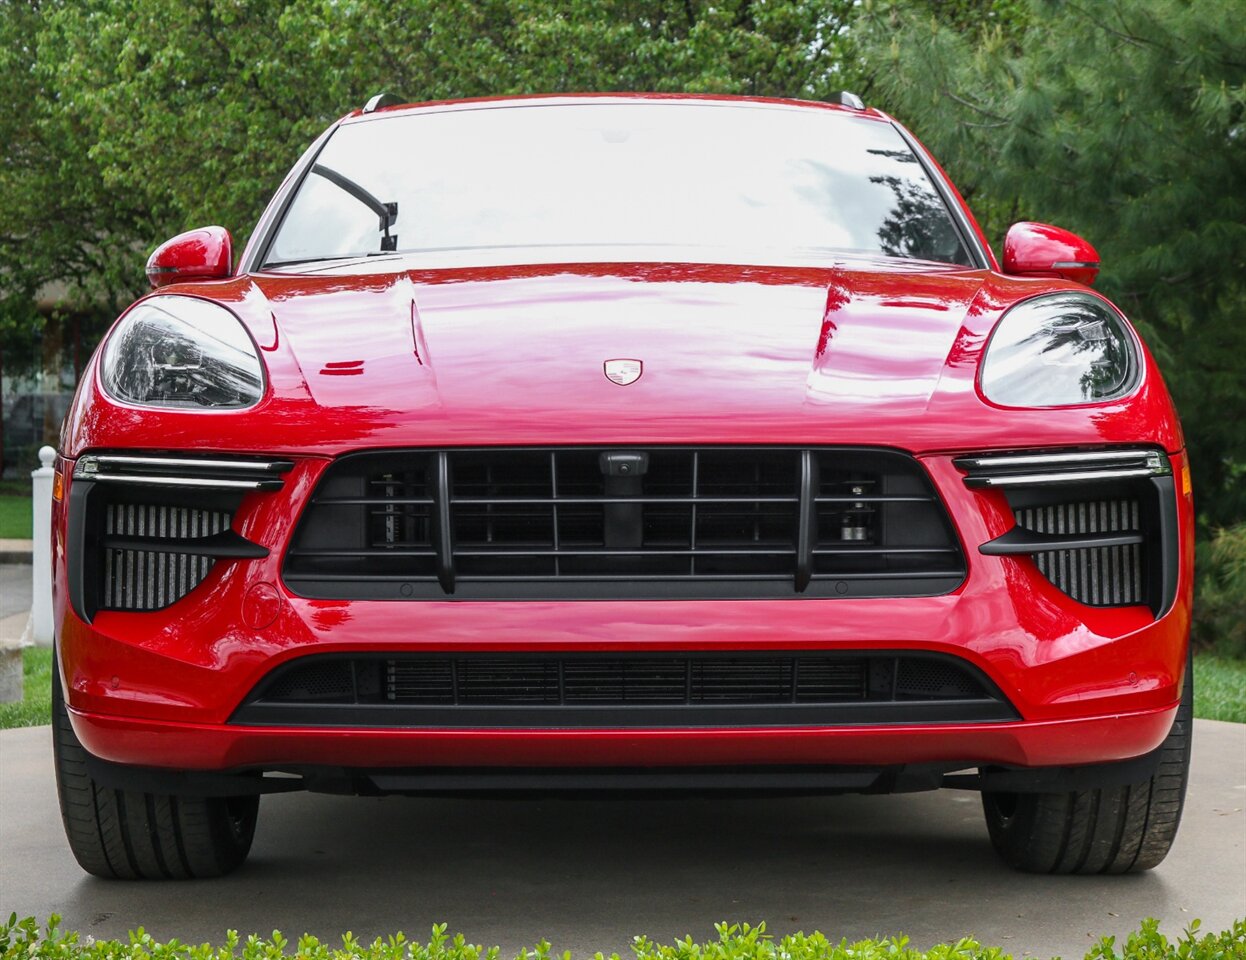 2020 Porsche Macan Turbo  (Lots of options MSRP $124,740) - Photo 35 - Springfield, MO 65802